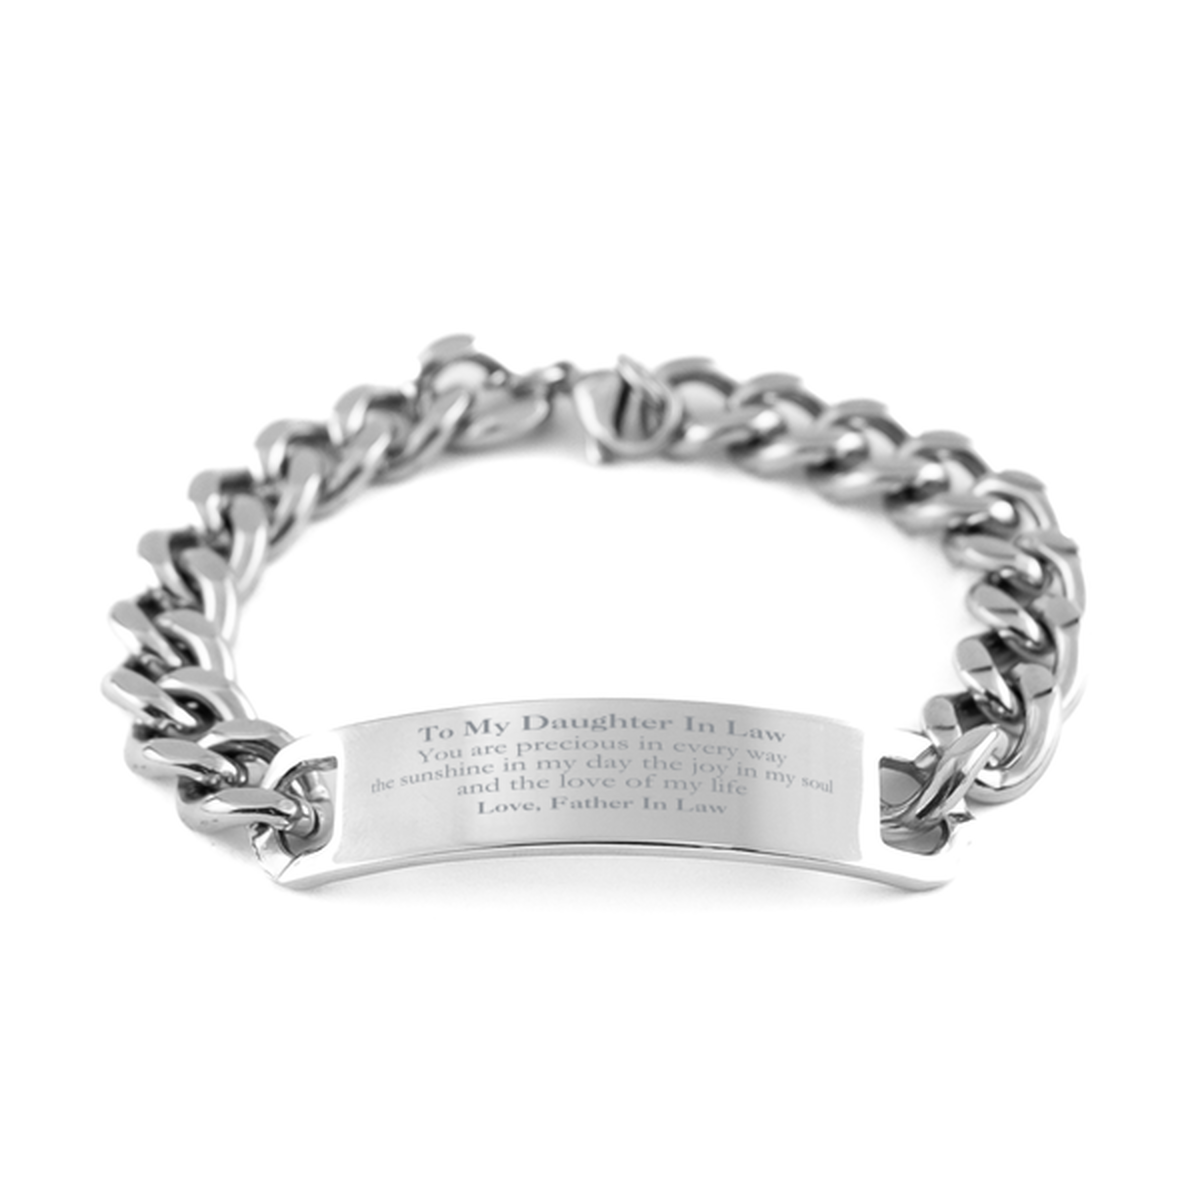 Graduation Gifts for Daughter In Law Cuban Chain Stainless Steel Bracelet Present from Father In Law, Christmas Daughter In Law Birthday Gifts Daughter In Law You are precious in every way the sunshine in my day. Love, Father In Law